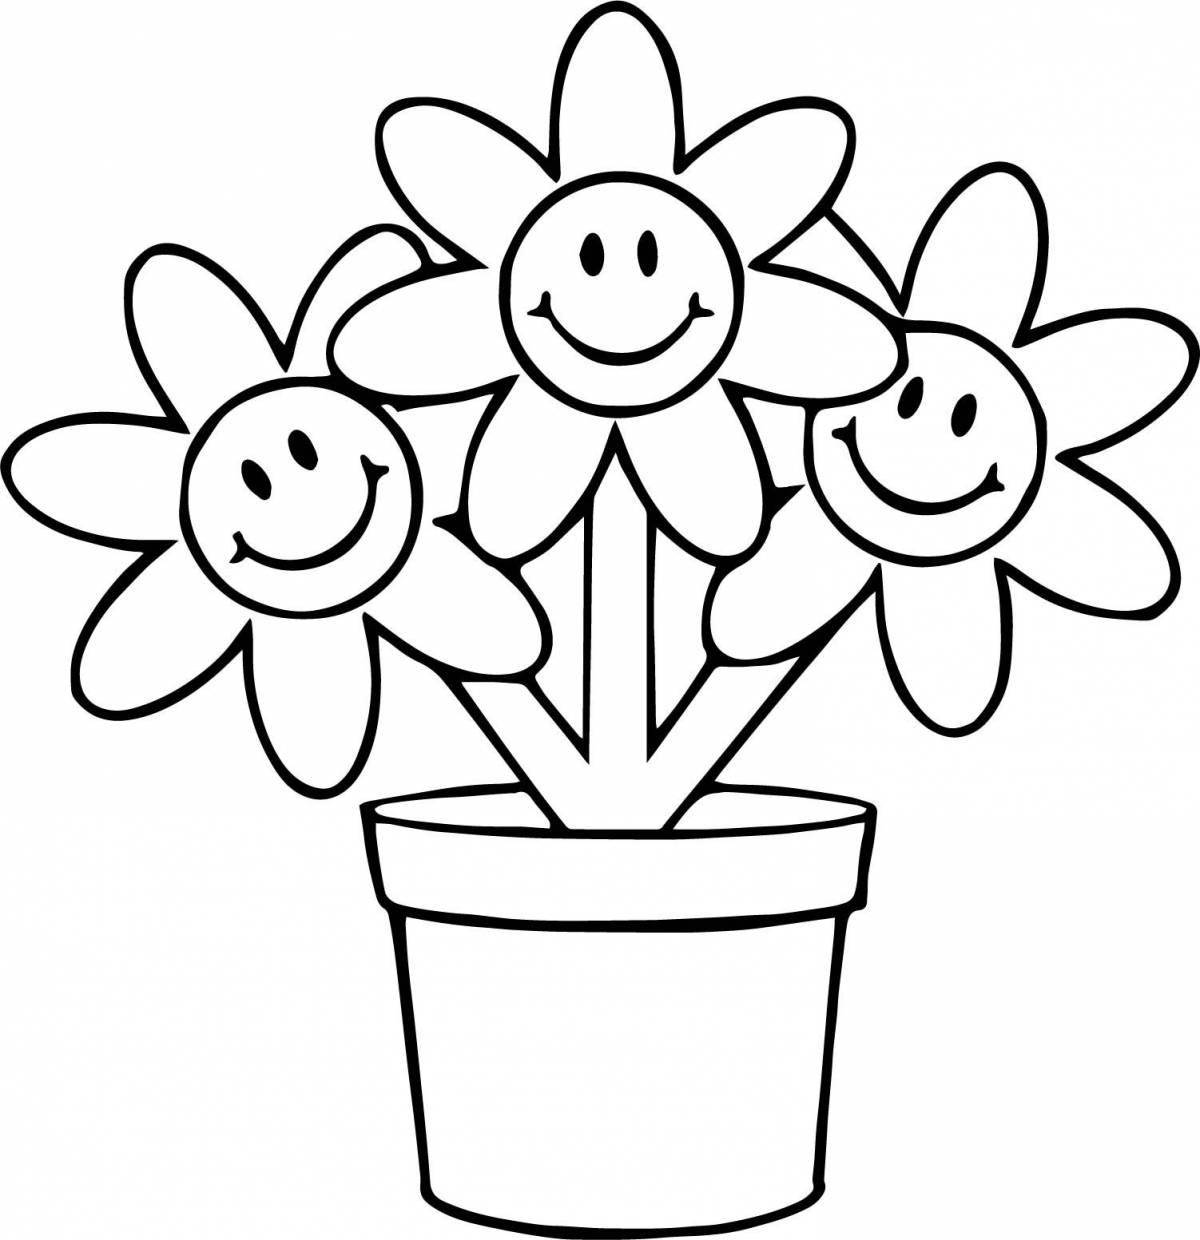 Joyful coloring flower picture for kids